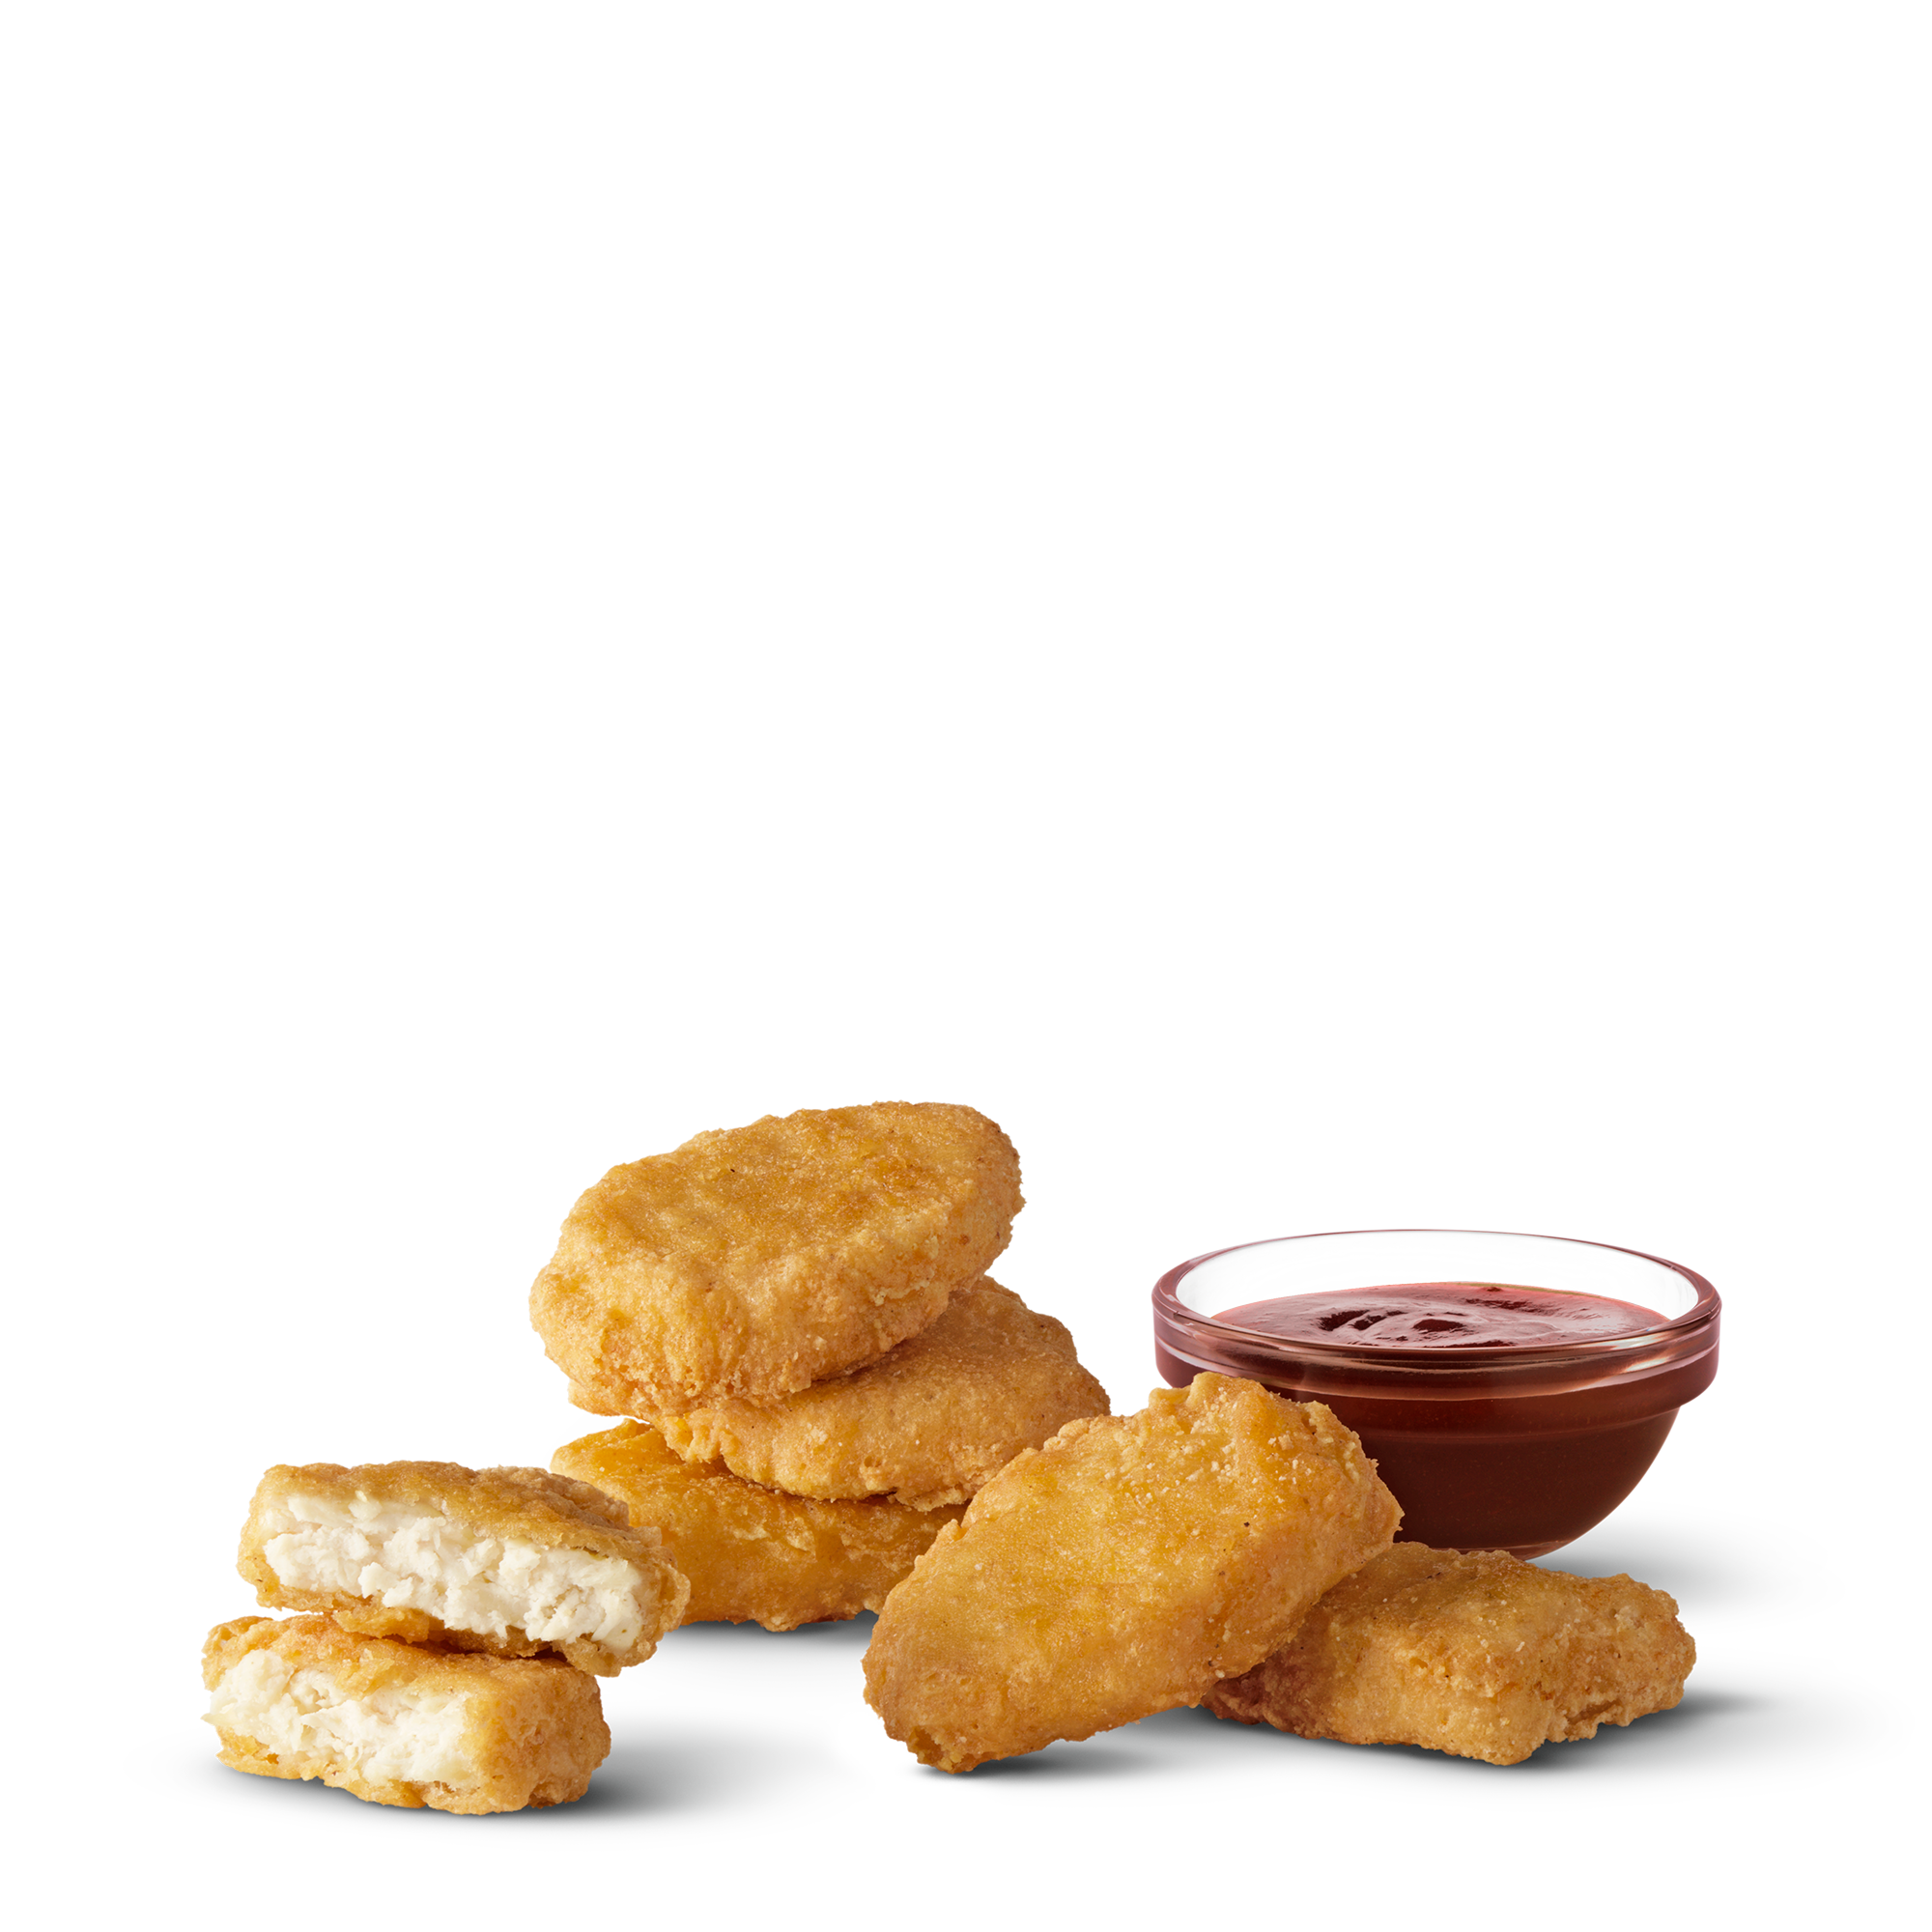 How to get a free 6-piece chicken nugget from McDonald's this Wednesday